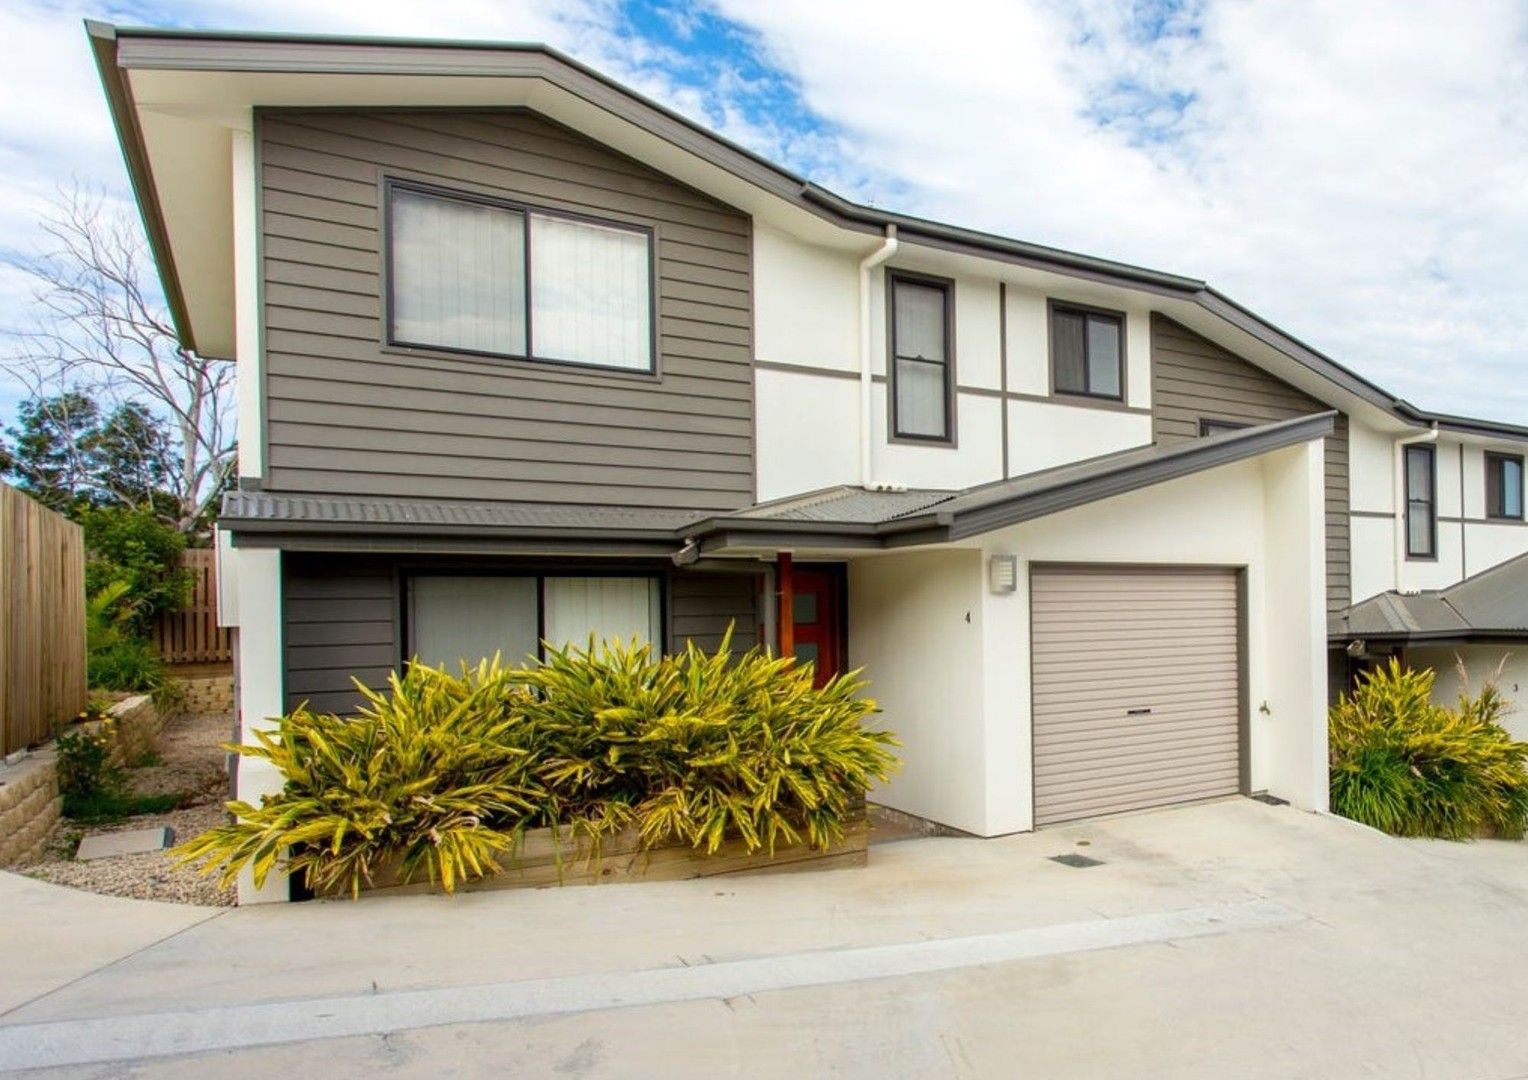 3 bedrooms Townhouse in 7/4-5 Shayduk Close GYMPIE QLD, 4570